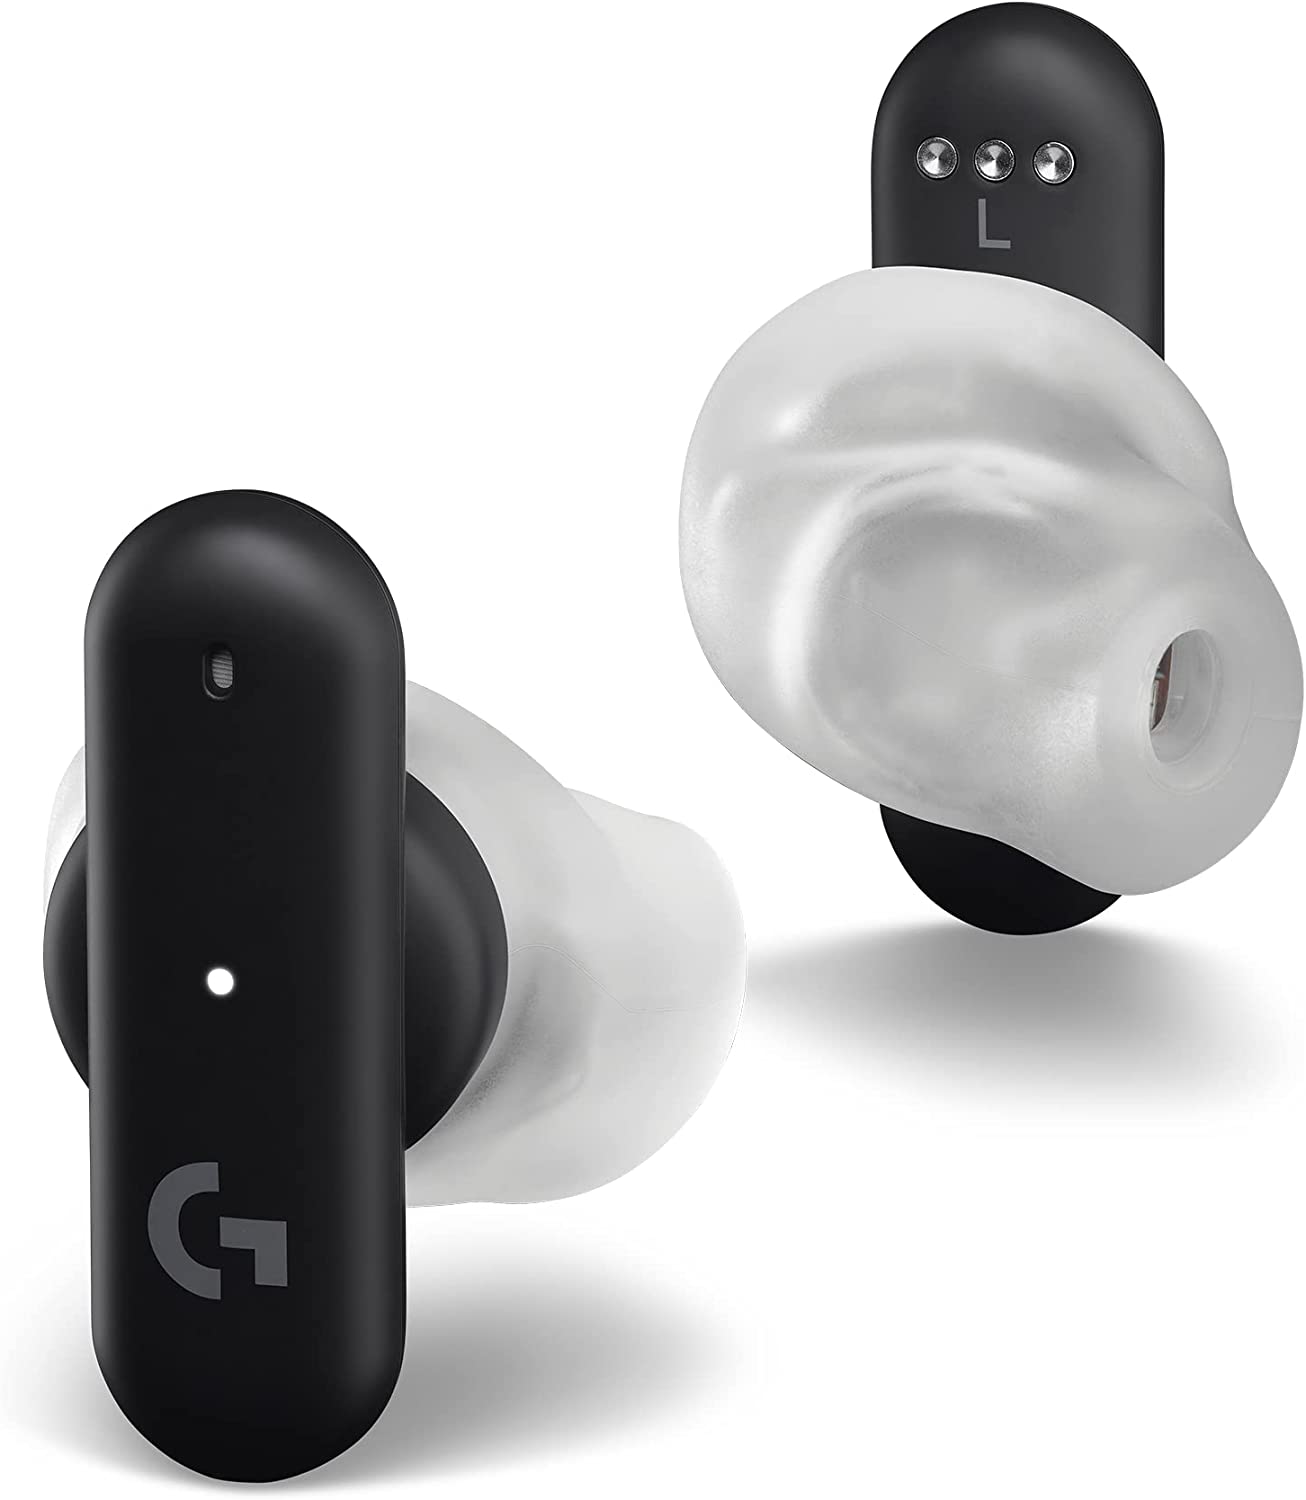 Top Rated 7 Gaming Earbuds That Will Give You an Unfair Advantage